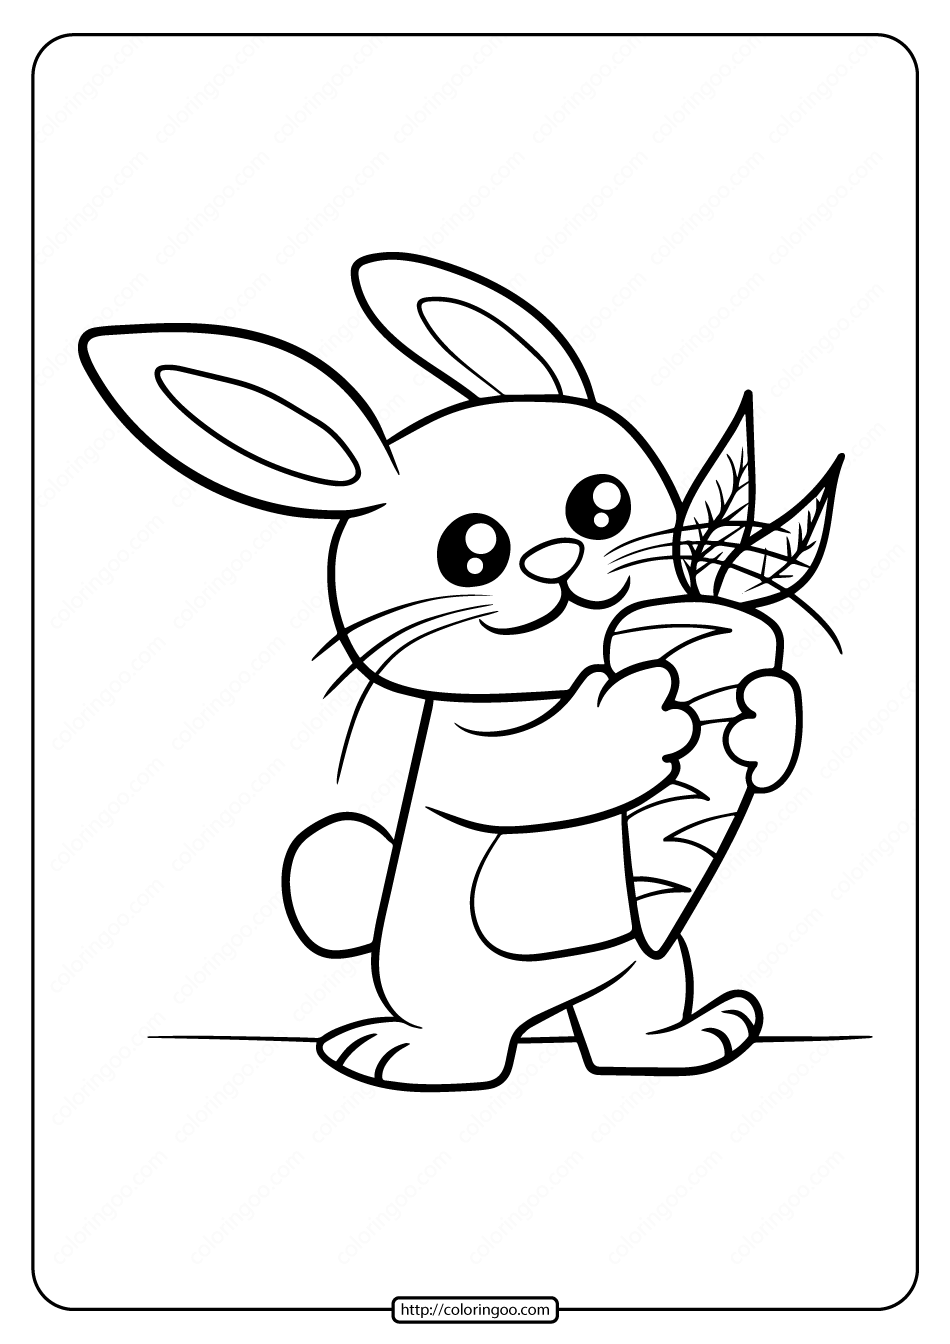 printable baby rabbit coloring page eat carrot